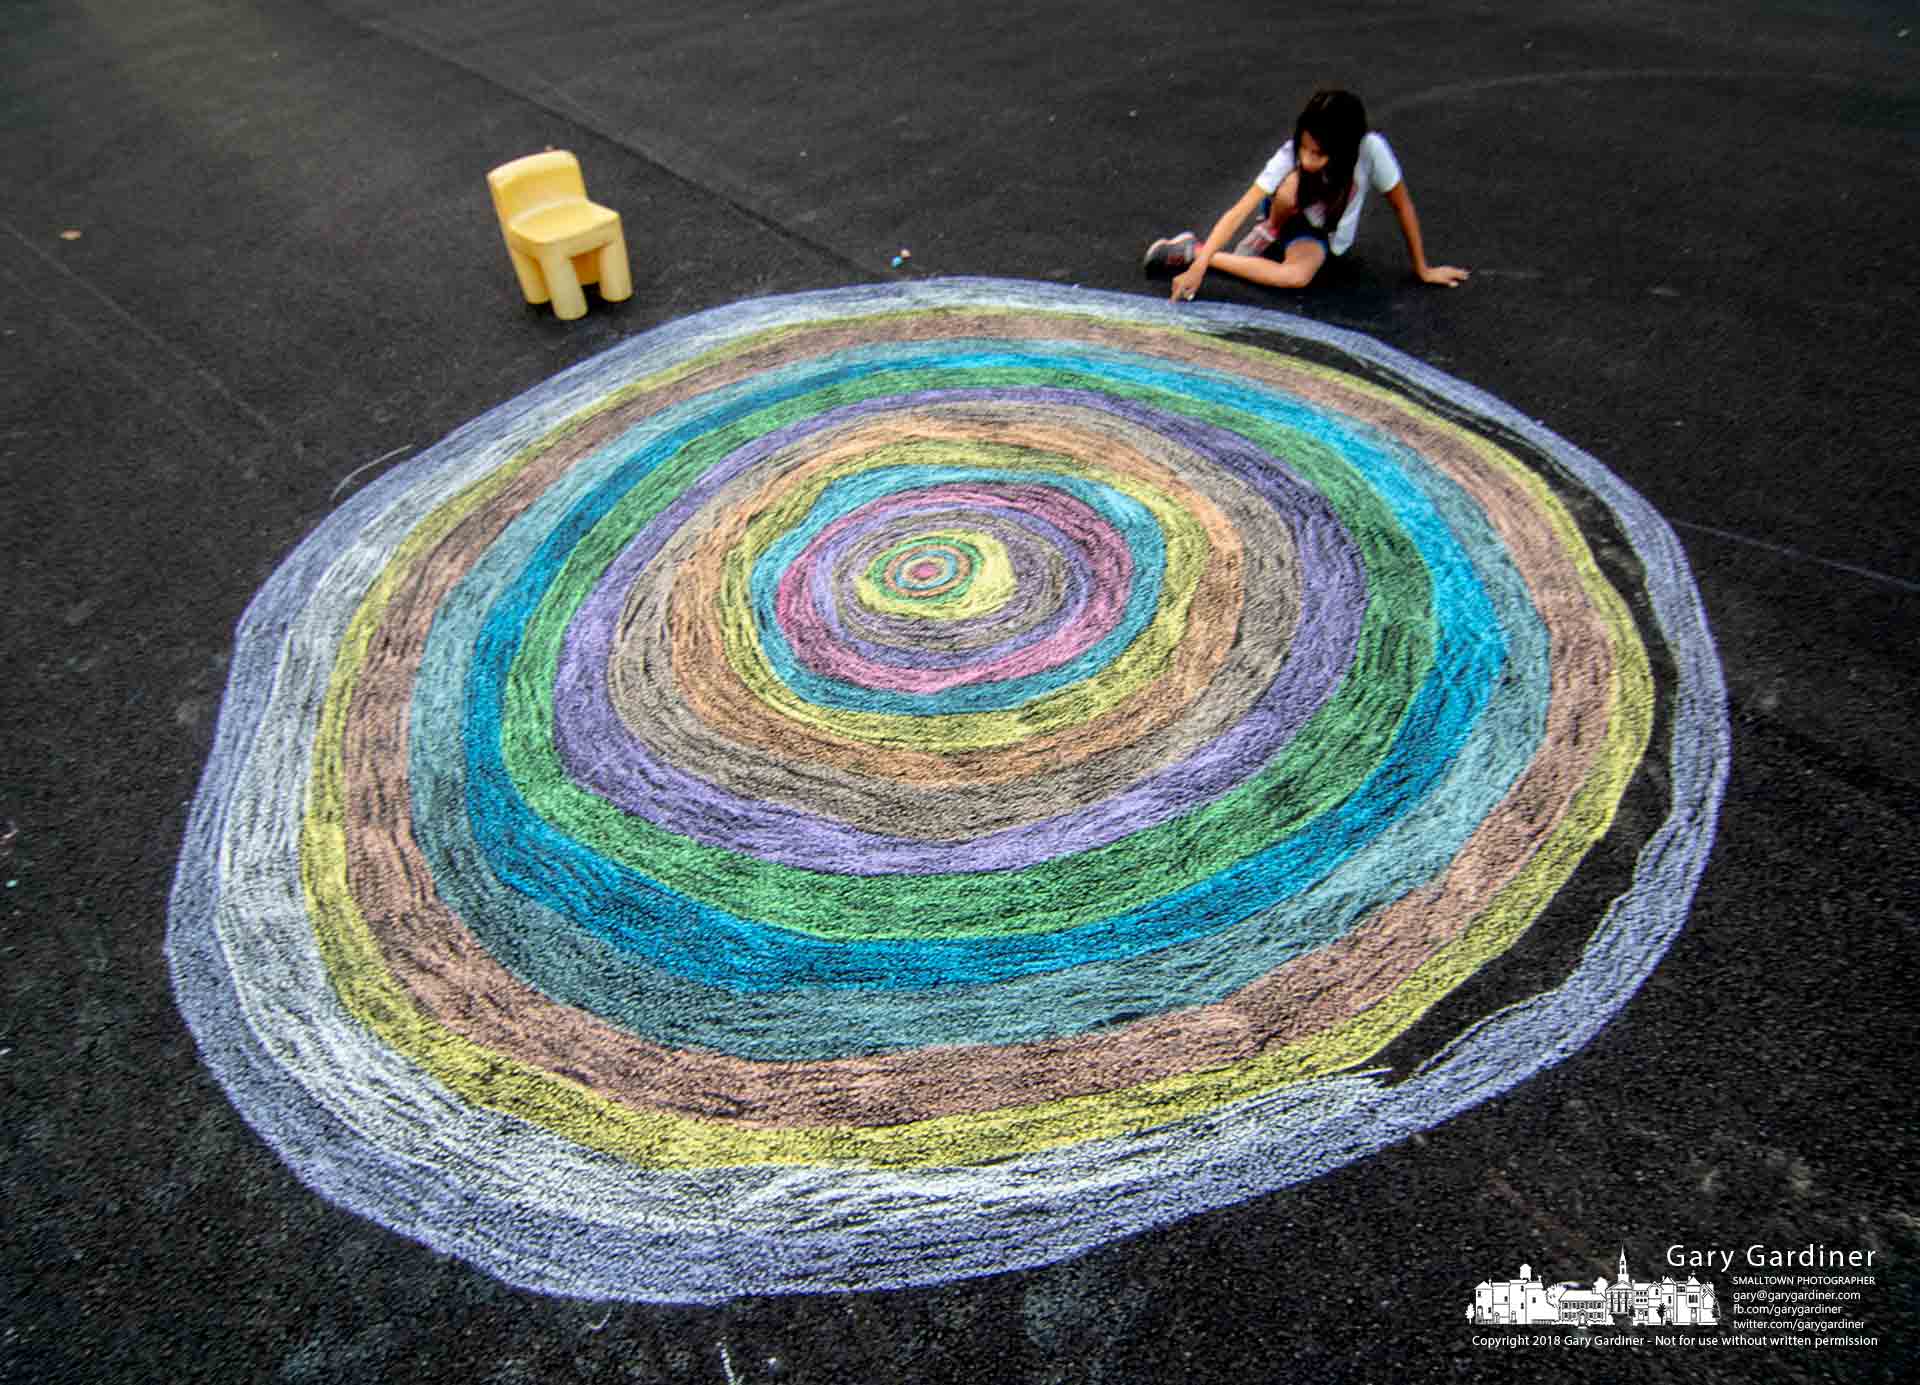 A young girl completes another circle drawn in chalk as she and her family begin coloring in with chalk the full cul-de-sac in front of their home. My Final Photo for July 6, 2018.